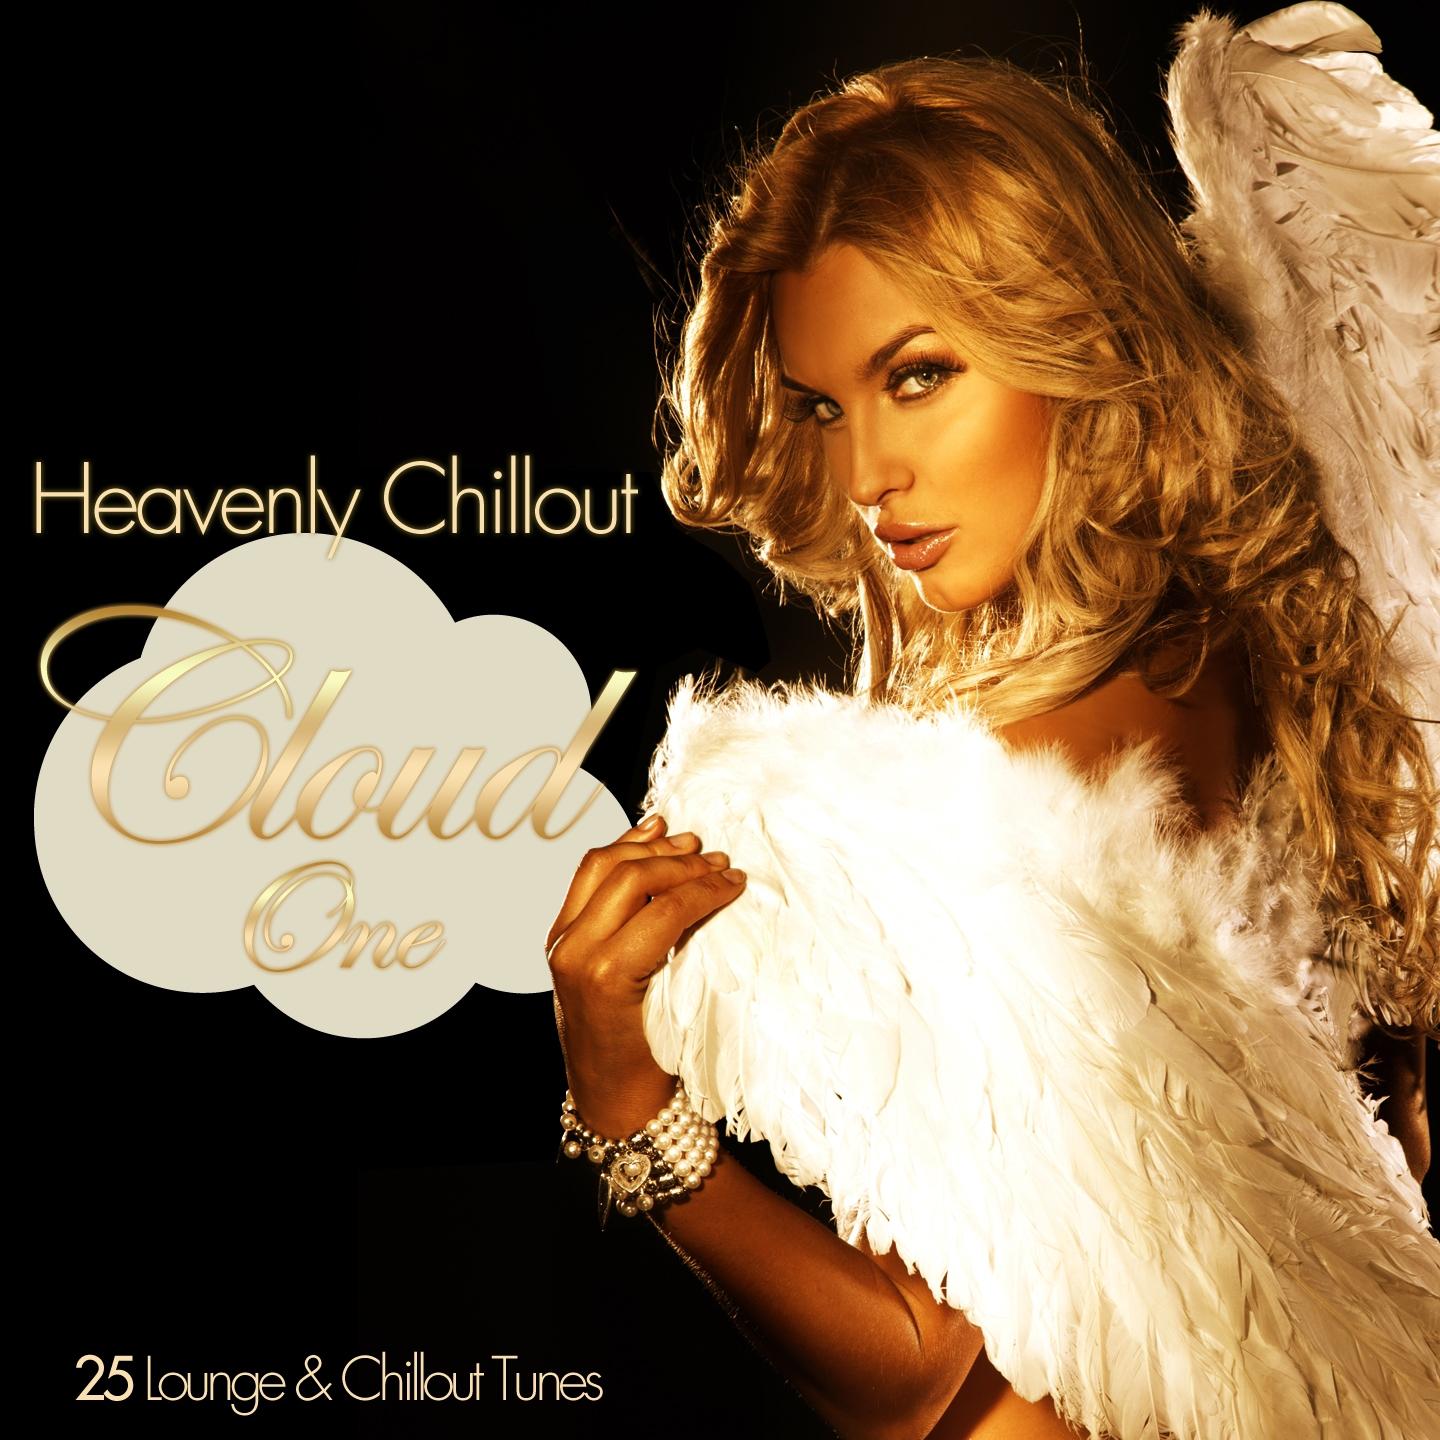 Постер альбома Heavenly Chillout Cloud One - 25 Lounge & Chillout Tunes